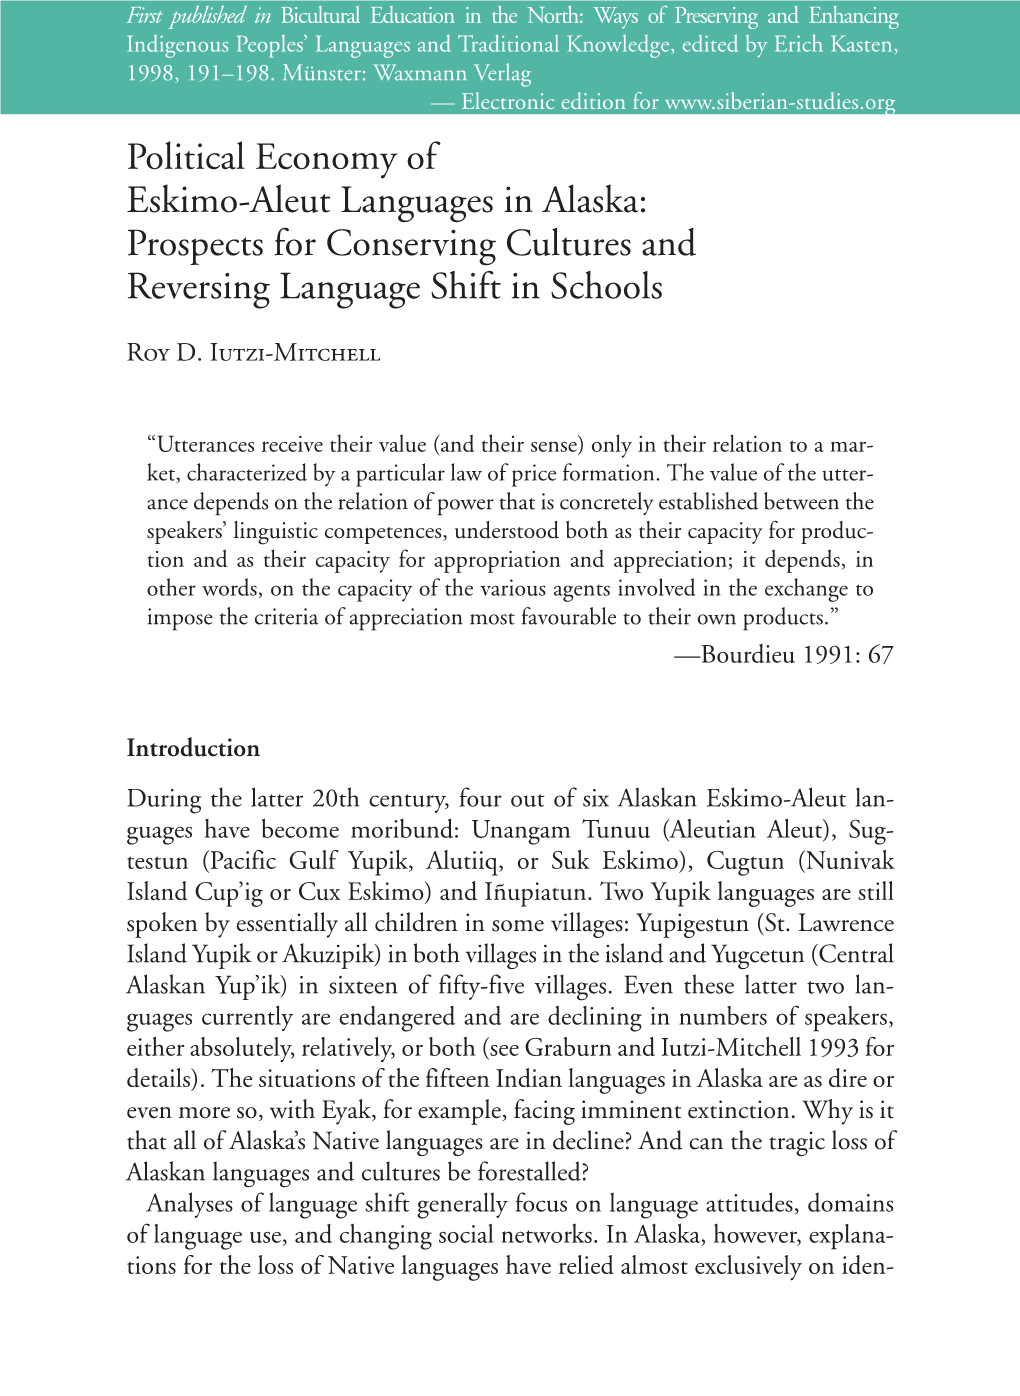 Political Economy of Eskimo-Aleut Languages in Alaska: Prospects for Conserving Cultures and Reversing Language Shift in Schools